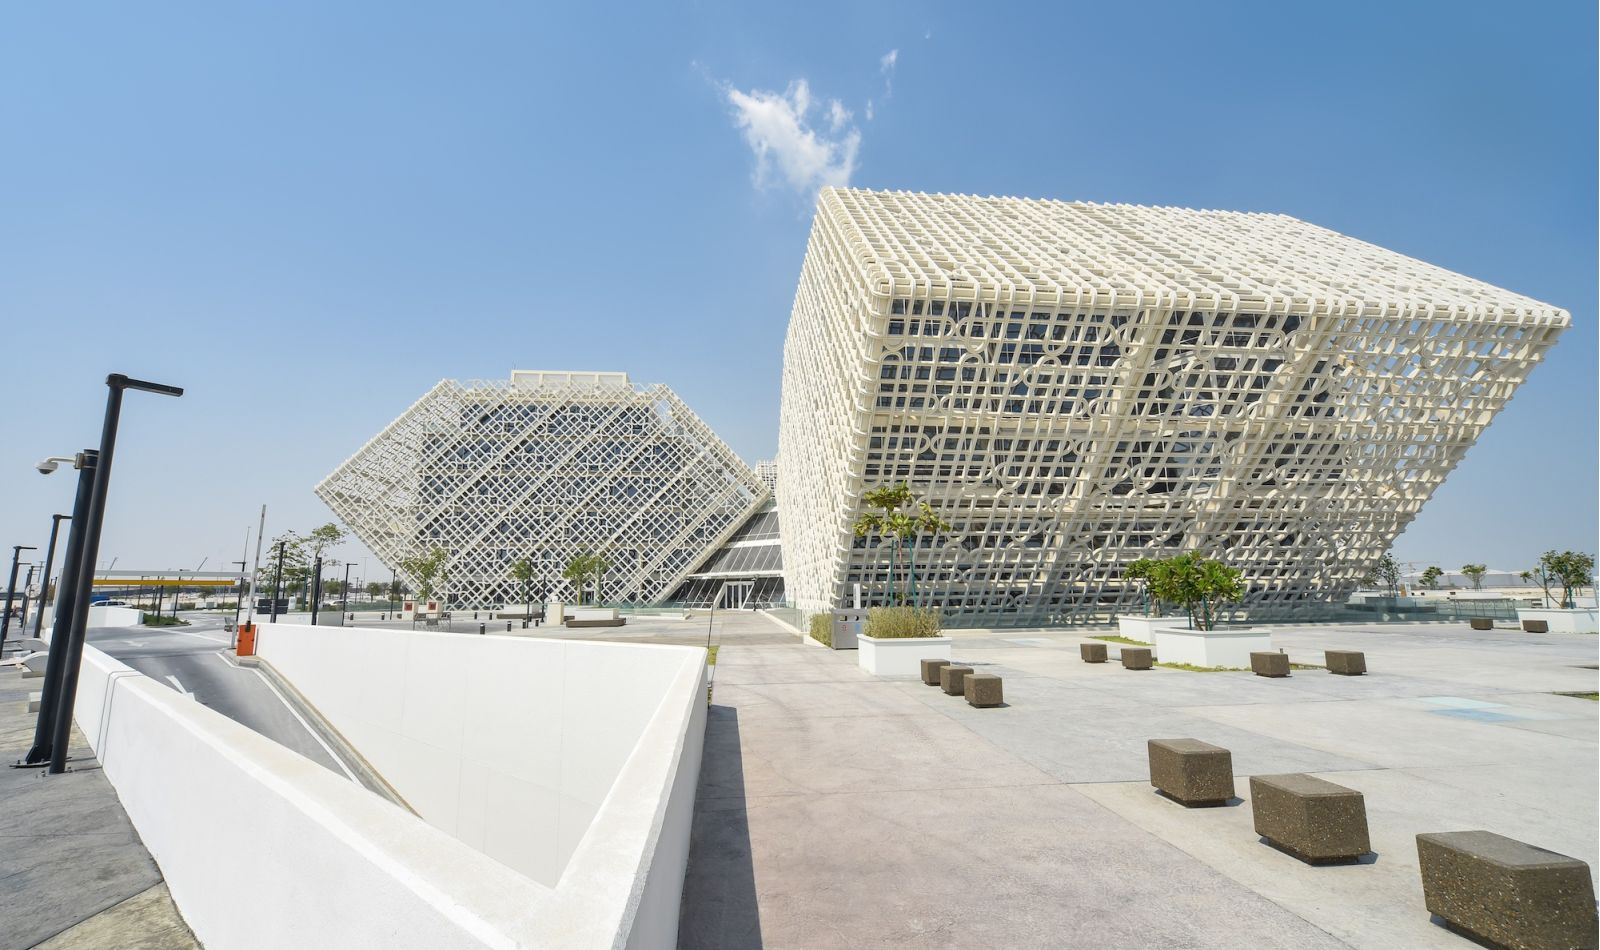 Exterior of Ras Bufontas Office Building, Hexagonal shape with white lattice covering